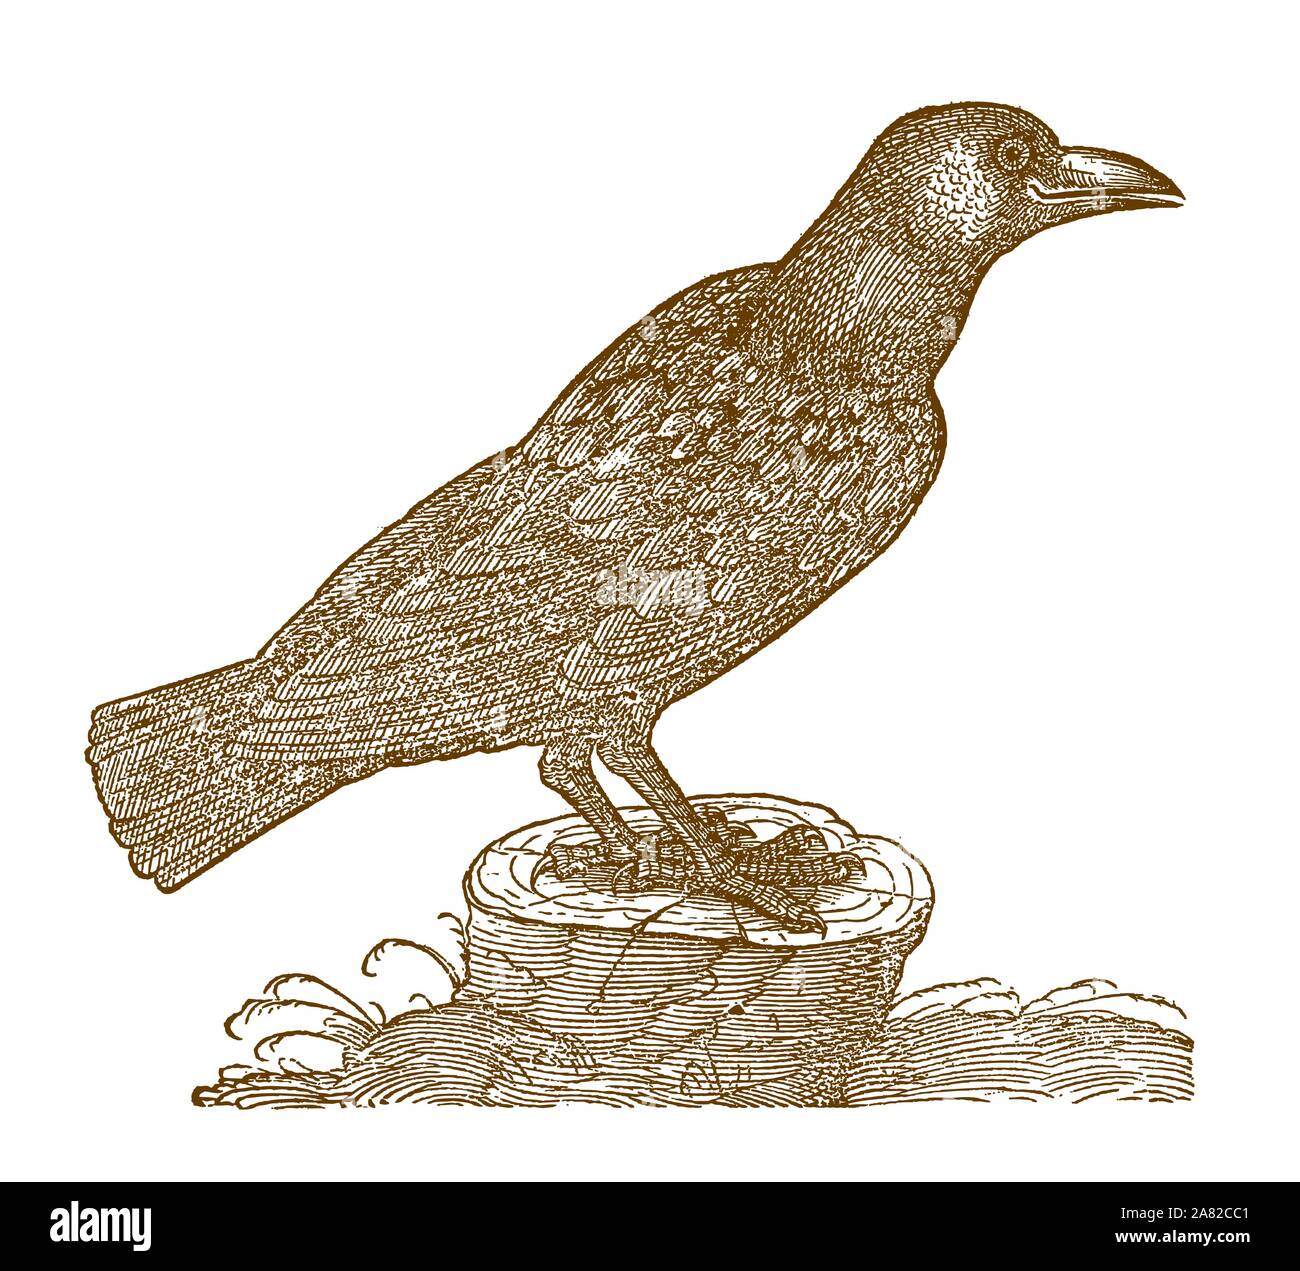 Common raven (corvus corax) sitting on a tree stump. Illustration after a historic woodcut from the 16th century Stock Vector